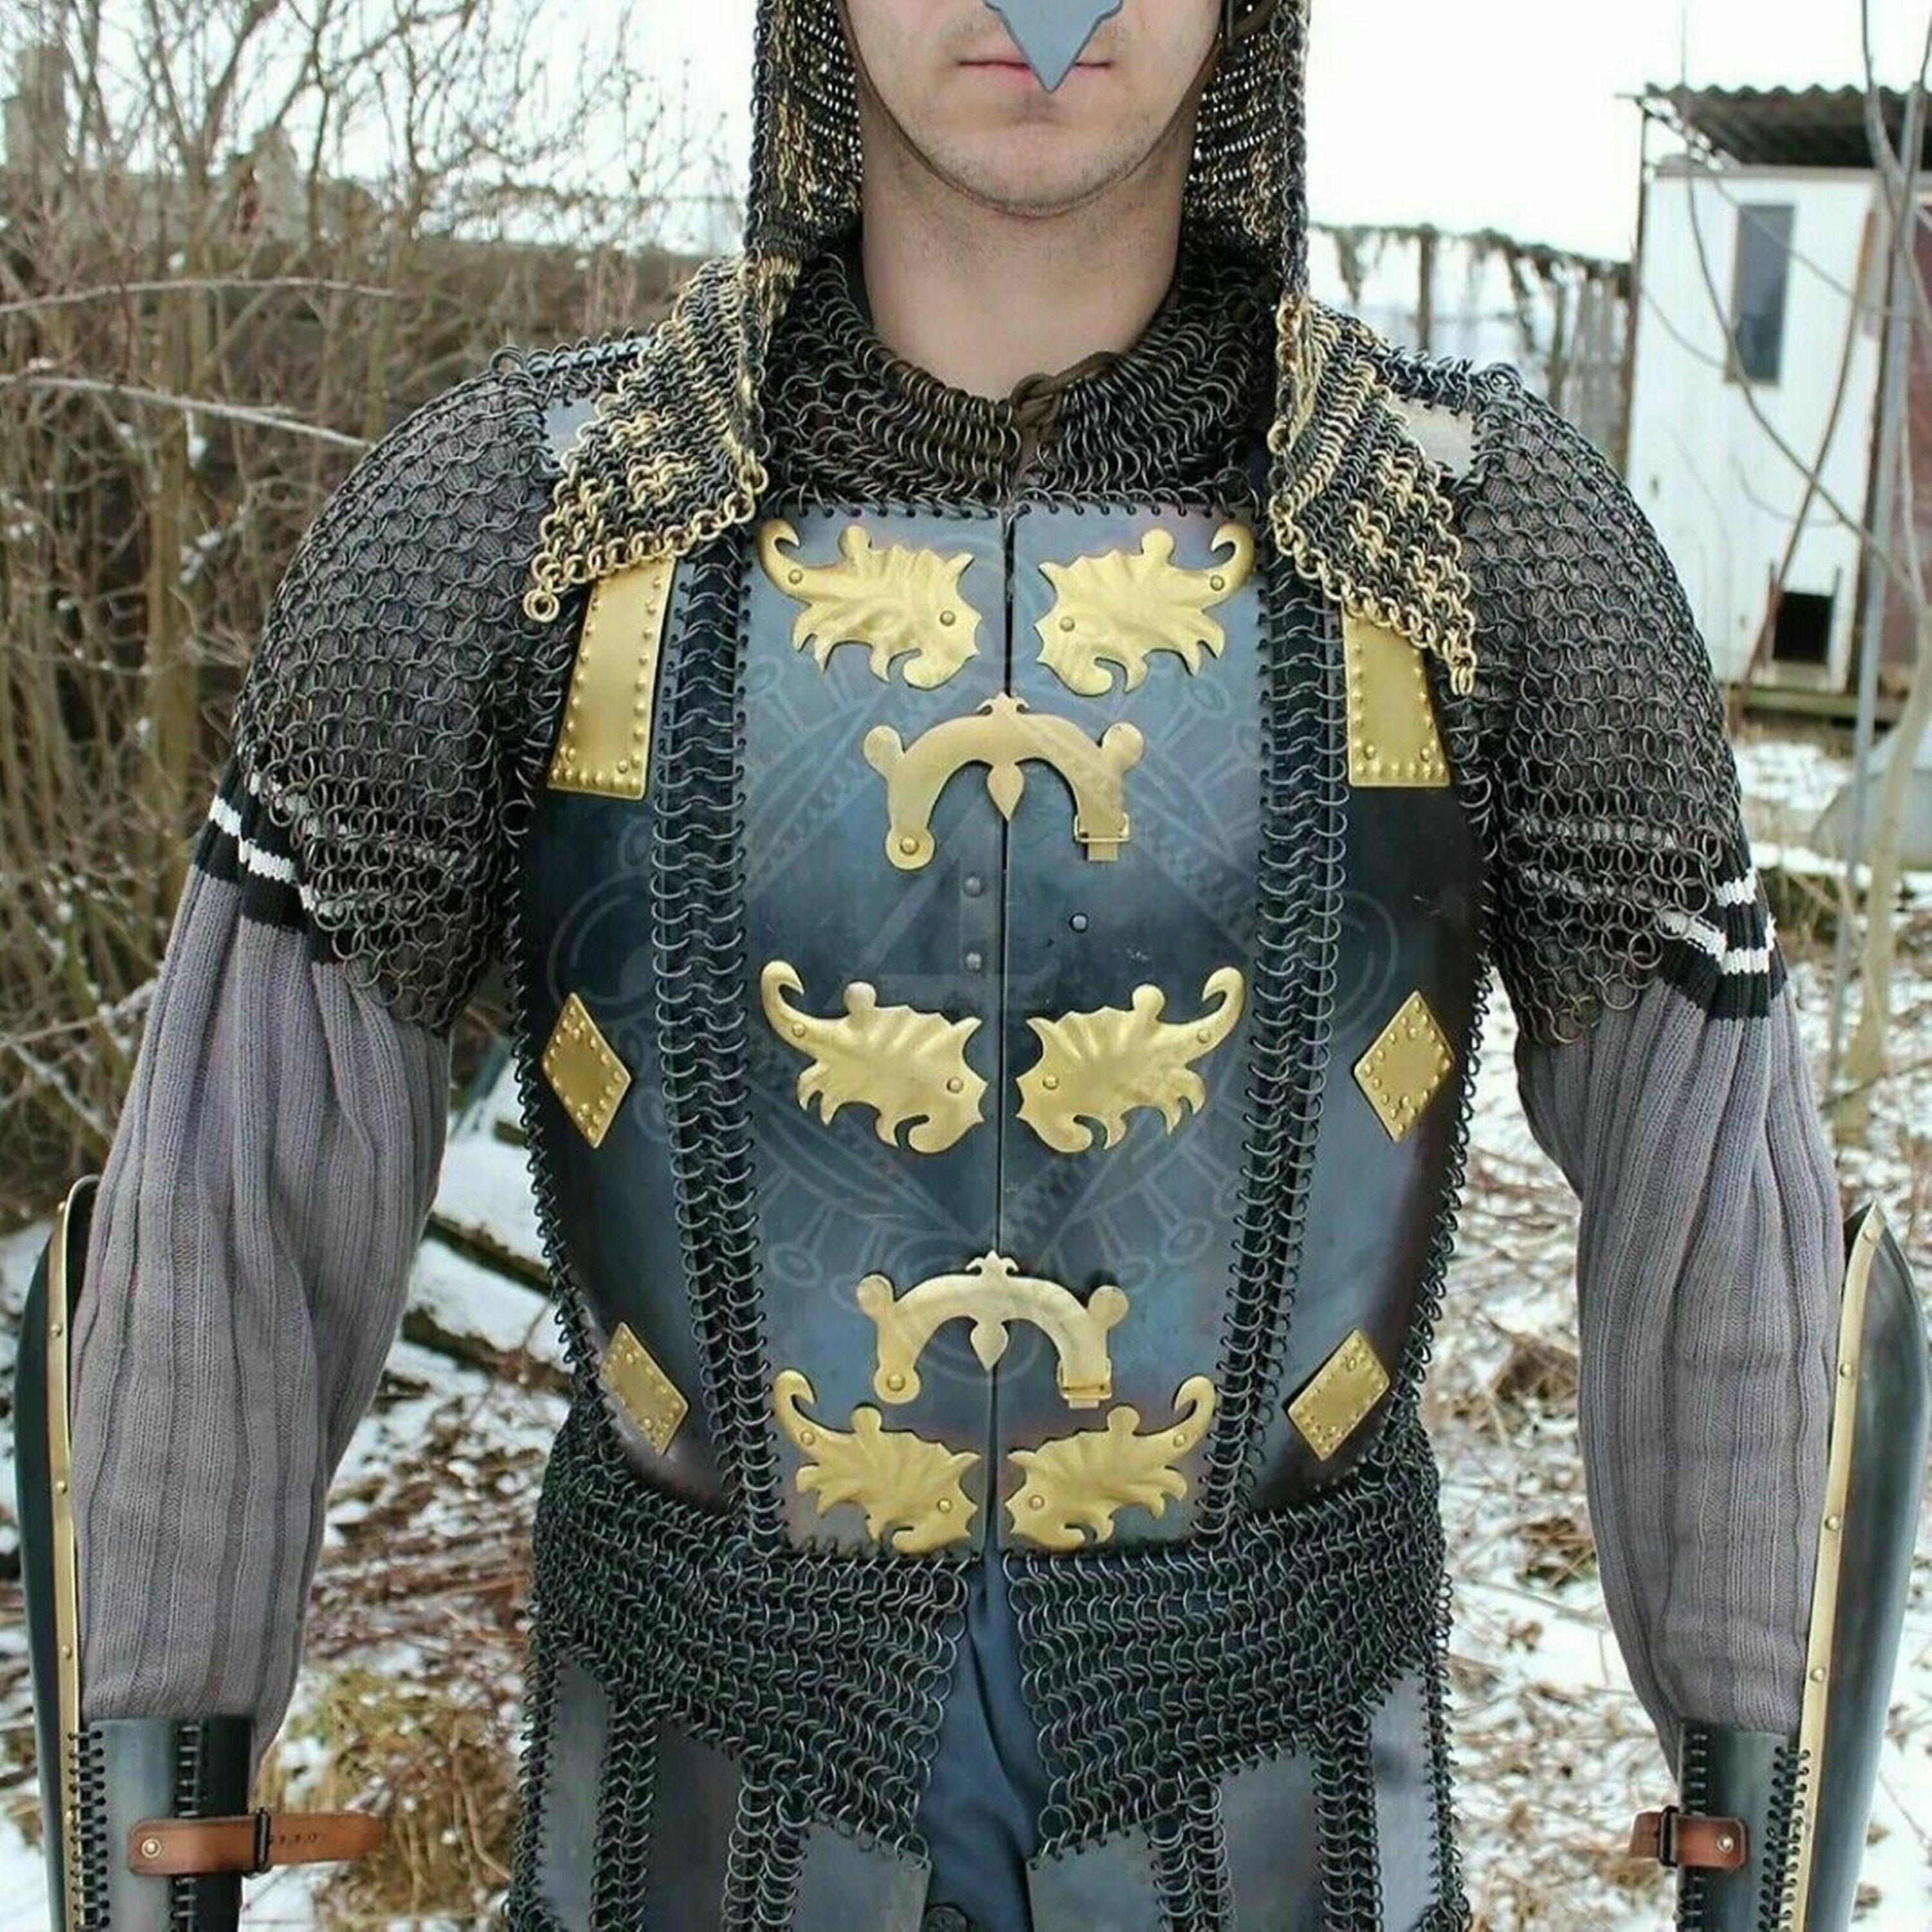 Medieval Chainmail Half Body Armour Suit | Etsy